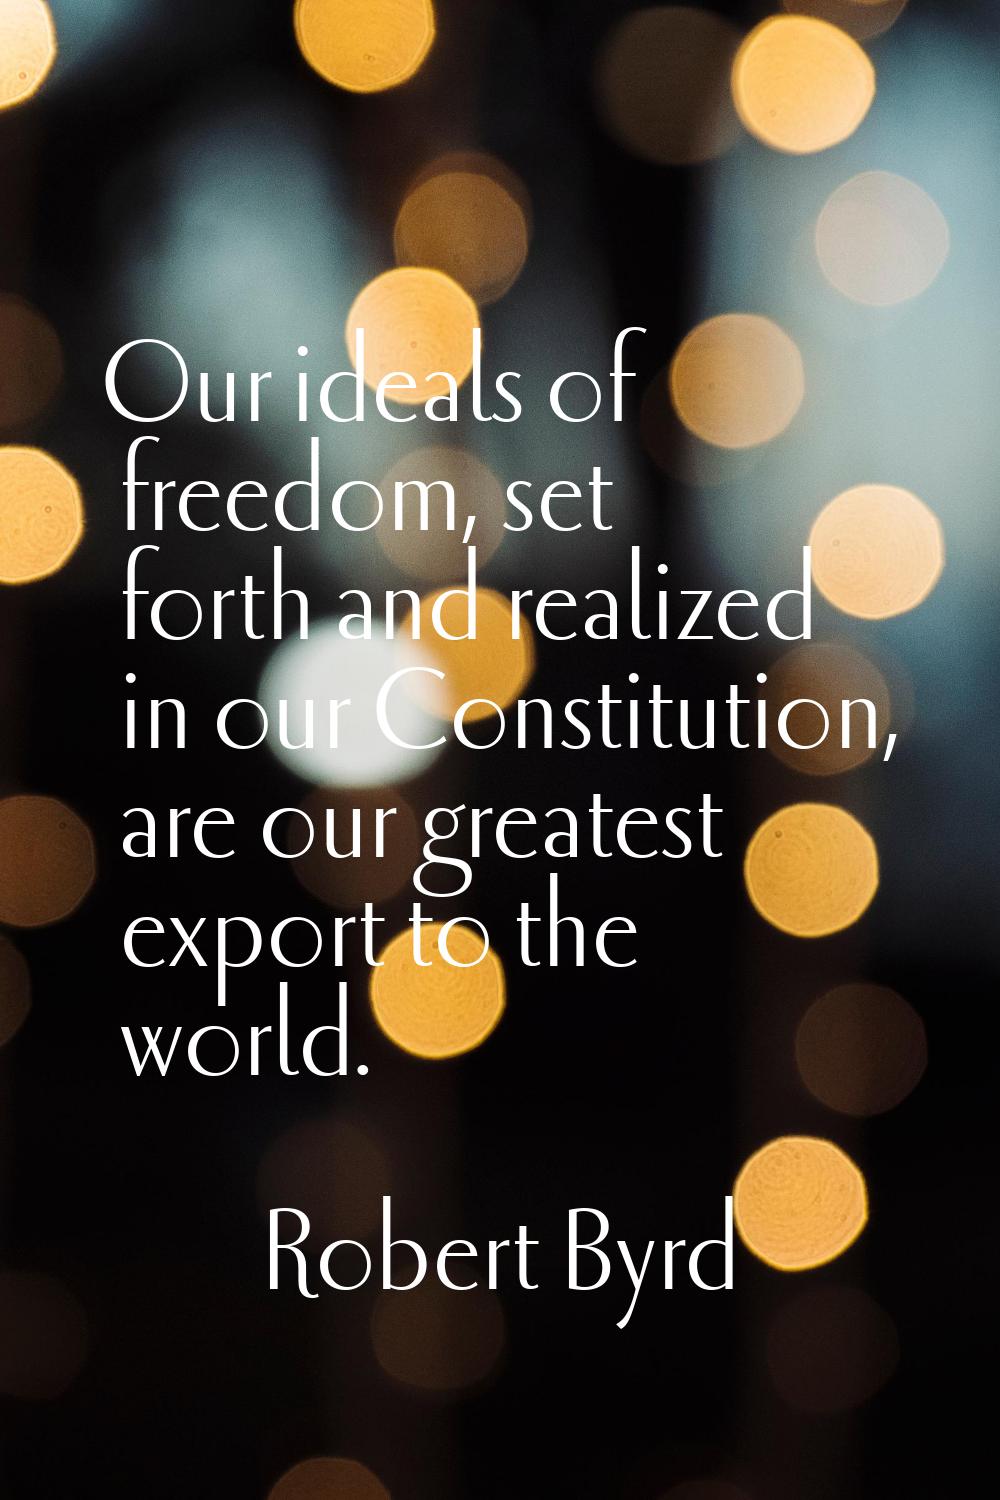 Our ideals of freedom, set forth and realized in our Constitution, are our greatest export to the w